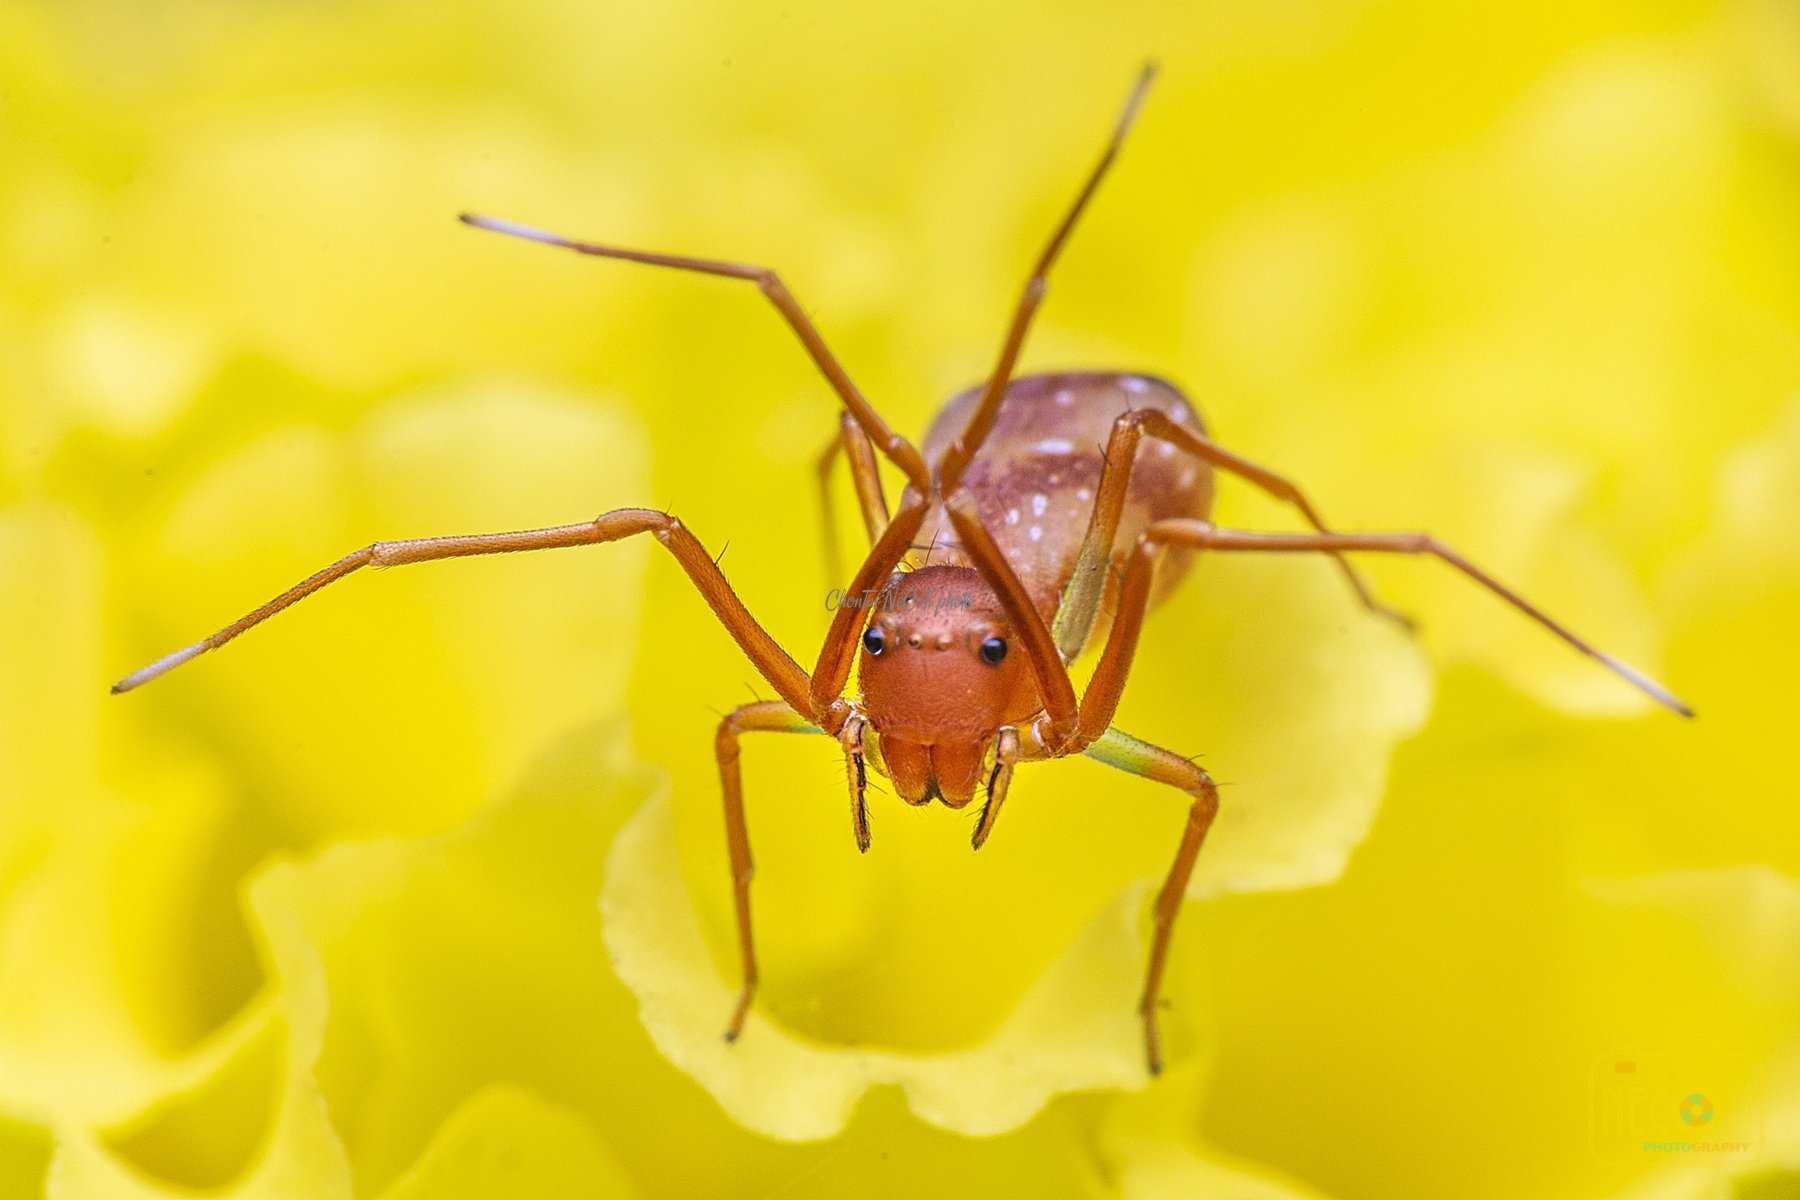 No People,  Animal,  Insect, Biting,  Close-up,  Pest,  Animal, Wildlife,  Nature,  Macrophotography,  macro,  Small,  Beautiul,  red, color,  yellow,  flower,  Spider,  Ant,  Human, Skin,  Upper East  Coast,  crab,  spider,  ant-mimic,  amyciaea,  lineat, NeCoTi ChonTin